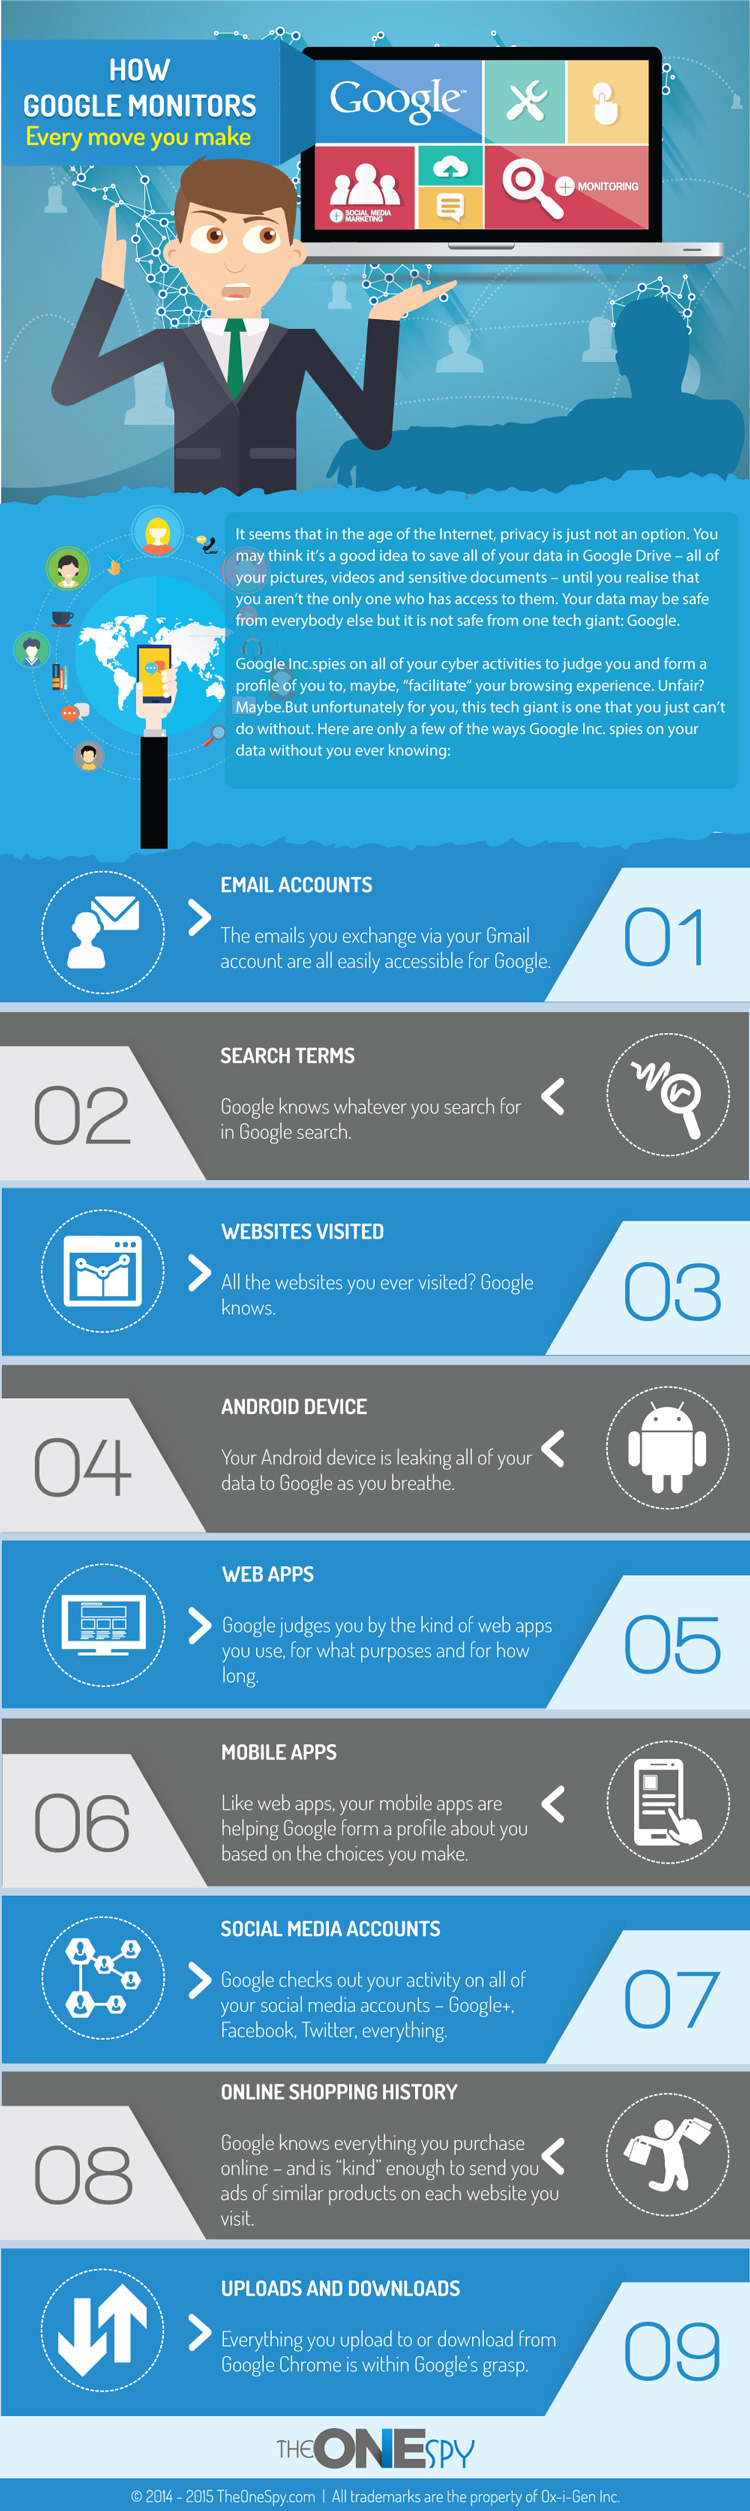 How Google Spies on You Round The Clock (Infographic)